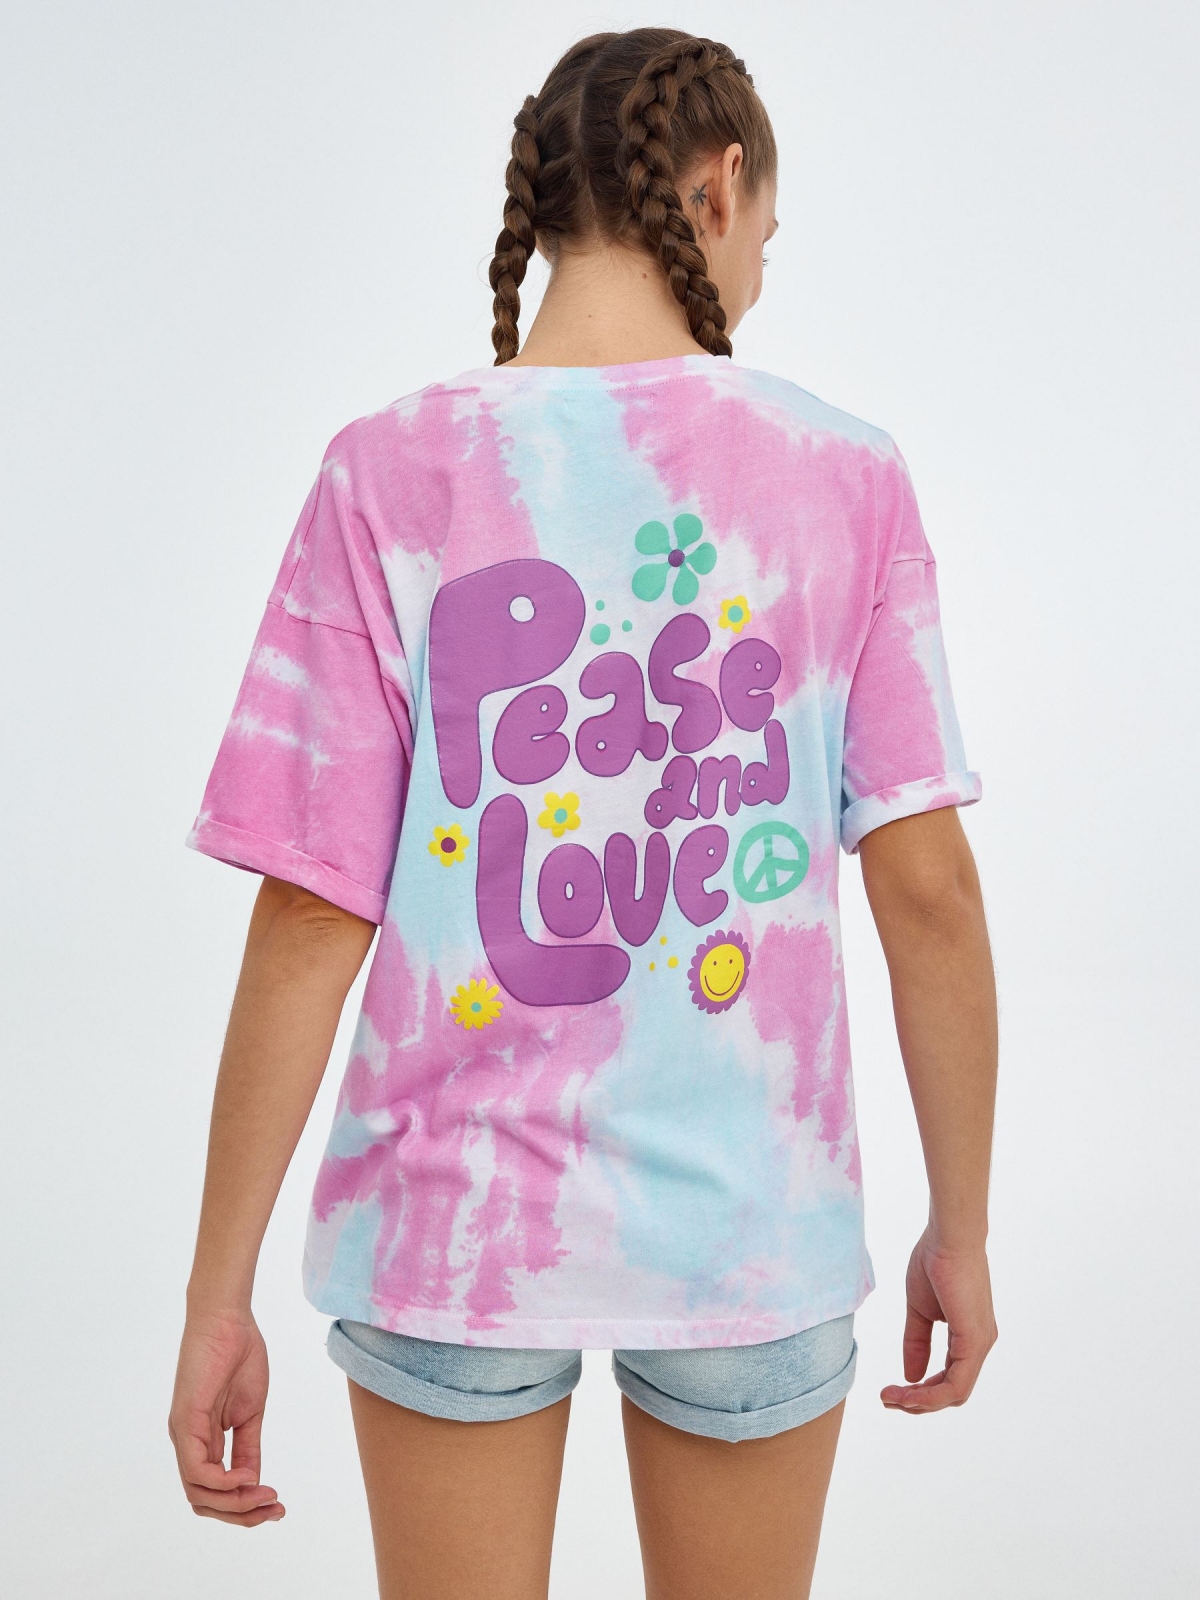 Tie&dye T-shirt Good Vibes multicolor middle back view